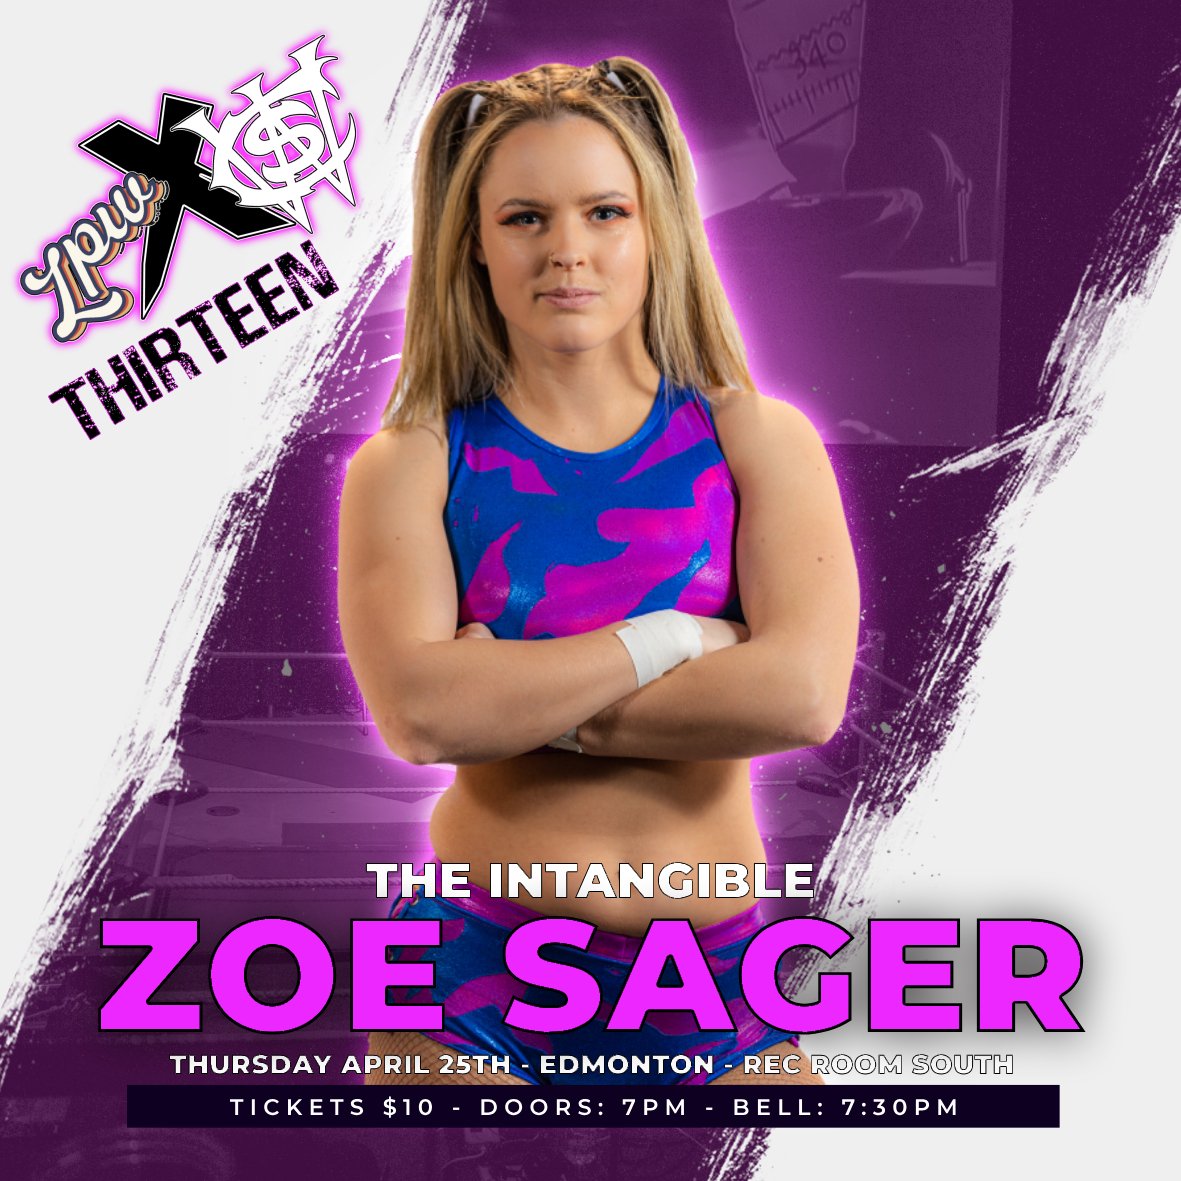 🚨LIVE WRESTLING! EDMONTON!🚨 LPWxCWS #13 - A PREQUEL TO LPW25 THURSDAY! APRIL 25TH! AT THE REC ROOM SOUTH! FEATURING THE INTANGIBLE ZOE SAGER TICKETS AVAILABLE IN ADVANCE AT THE LINK OR AT THE DOOR FOR ONLY $10(+fees)! 🎟️ tixr.com/groups/lovewre… 🎟️ BE THERE! JOIN THE